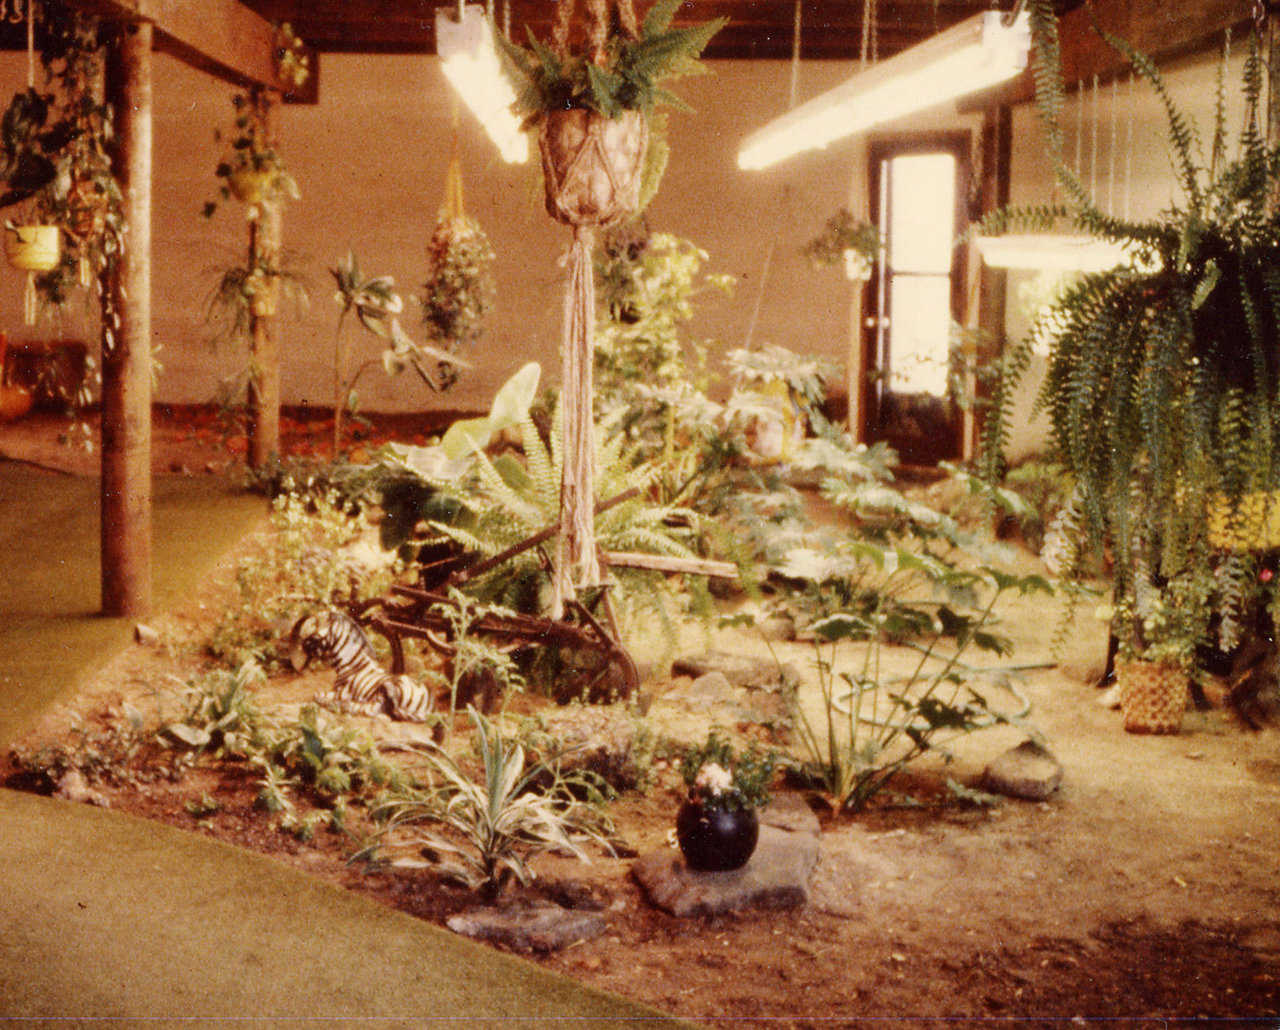 Indoor Garden — Its 1000 square feet included a pond and a banana tree that actually bloomed and bore fruit in 1984.